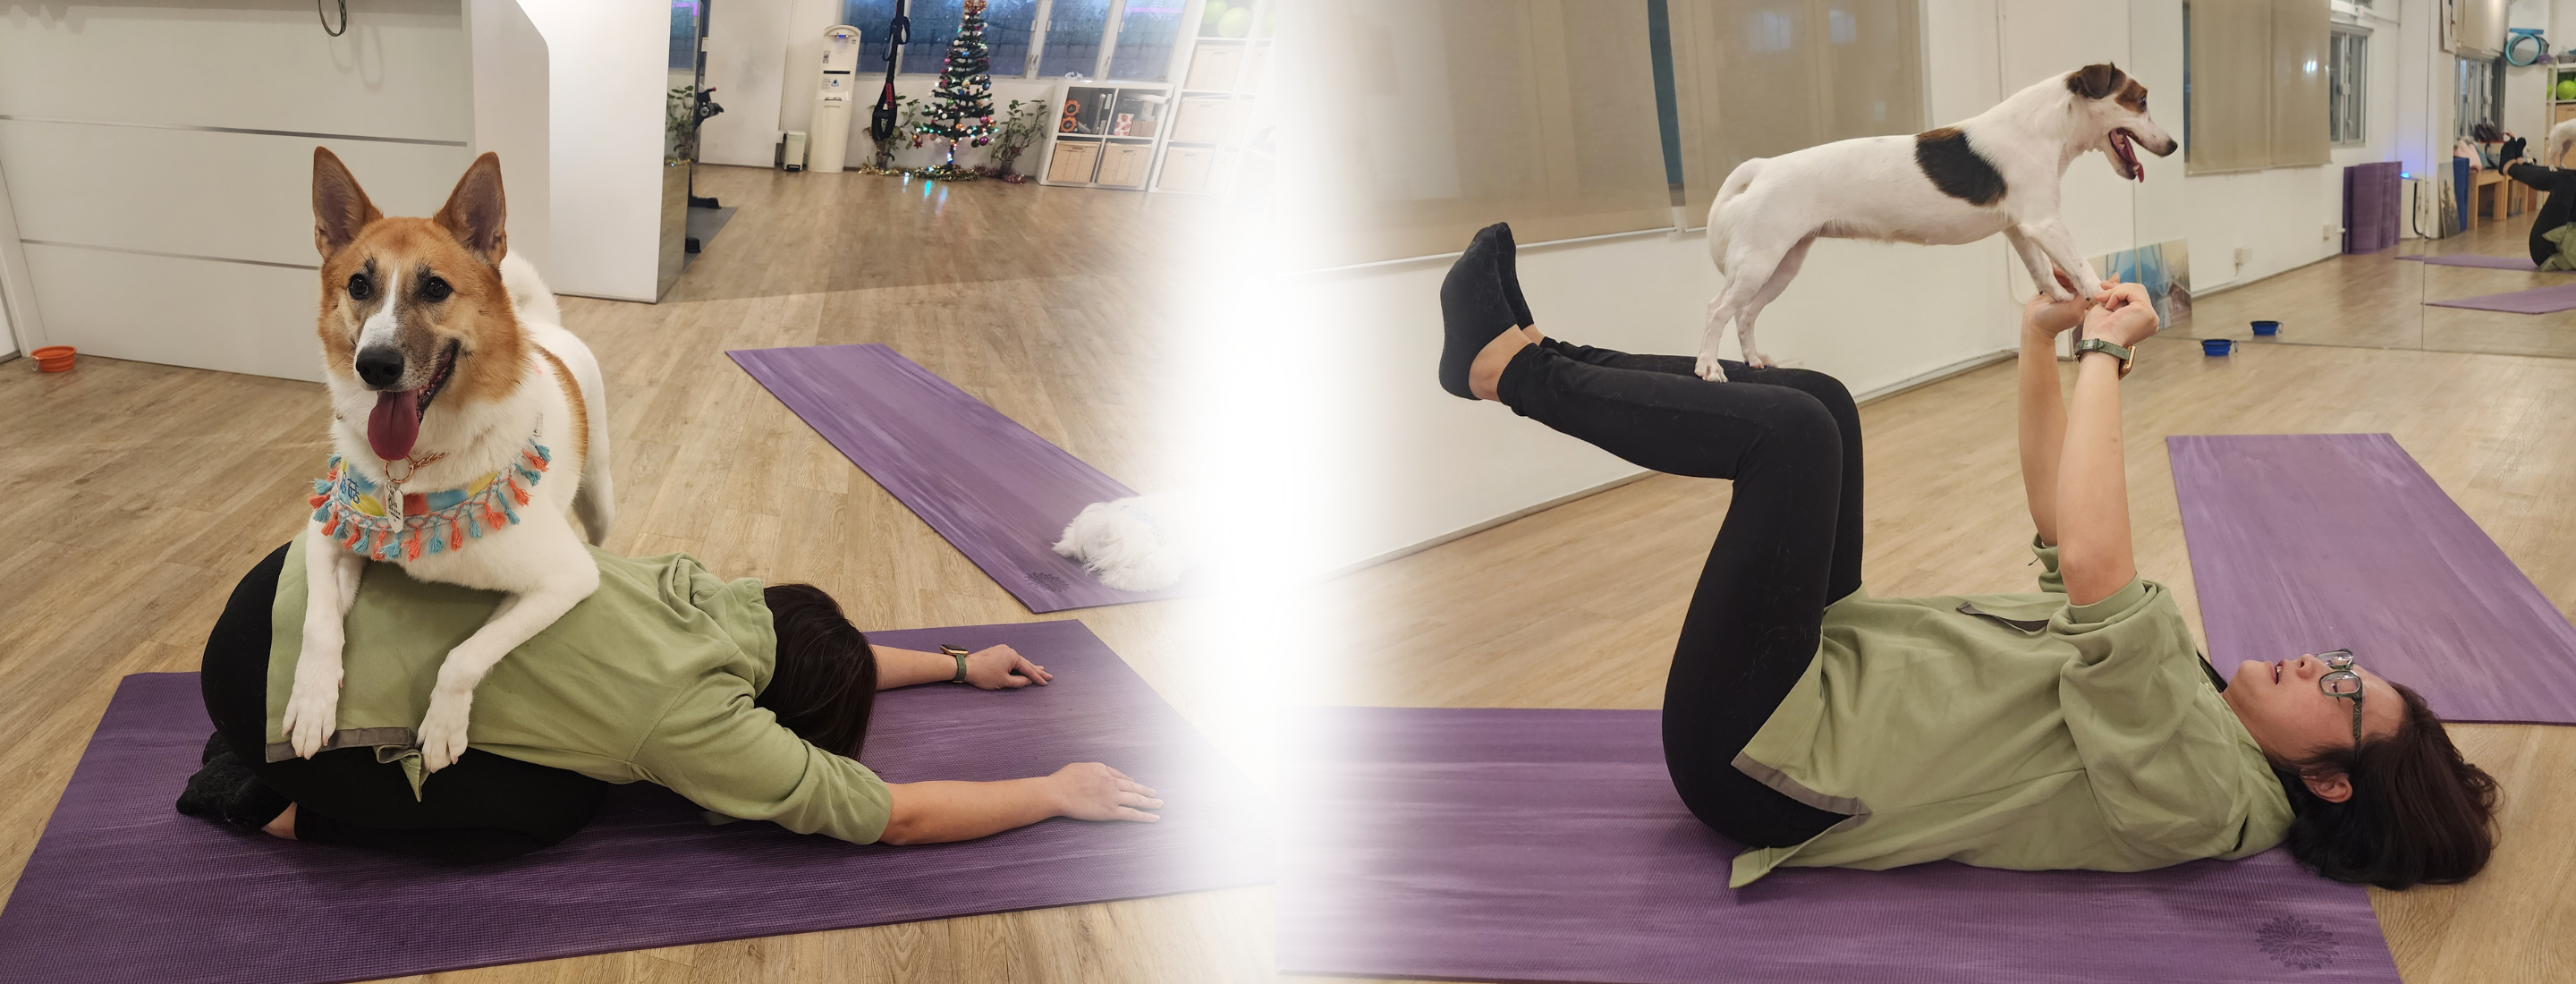 Yoga with Dogs：3 Benefits of Doga for You and Your Dog